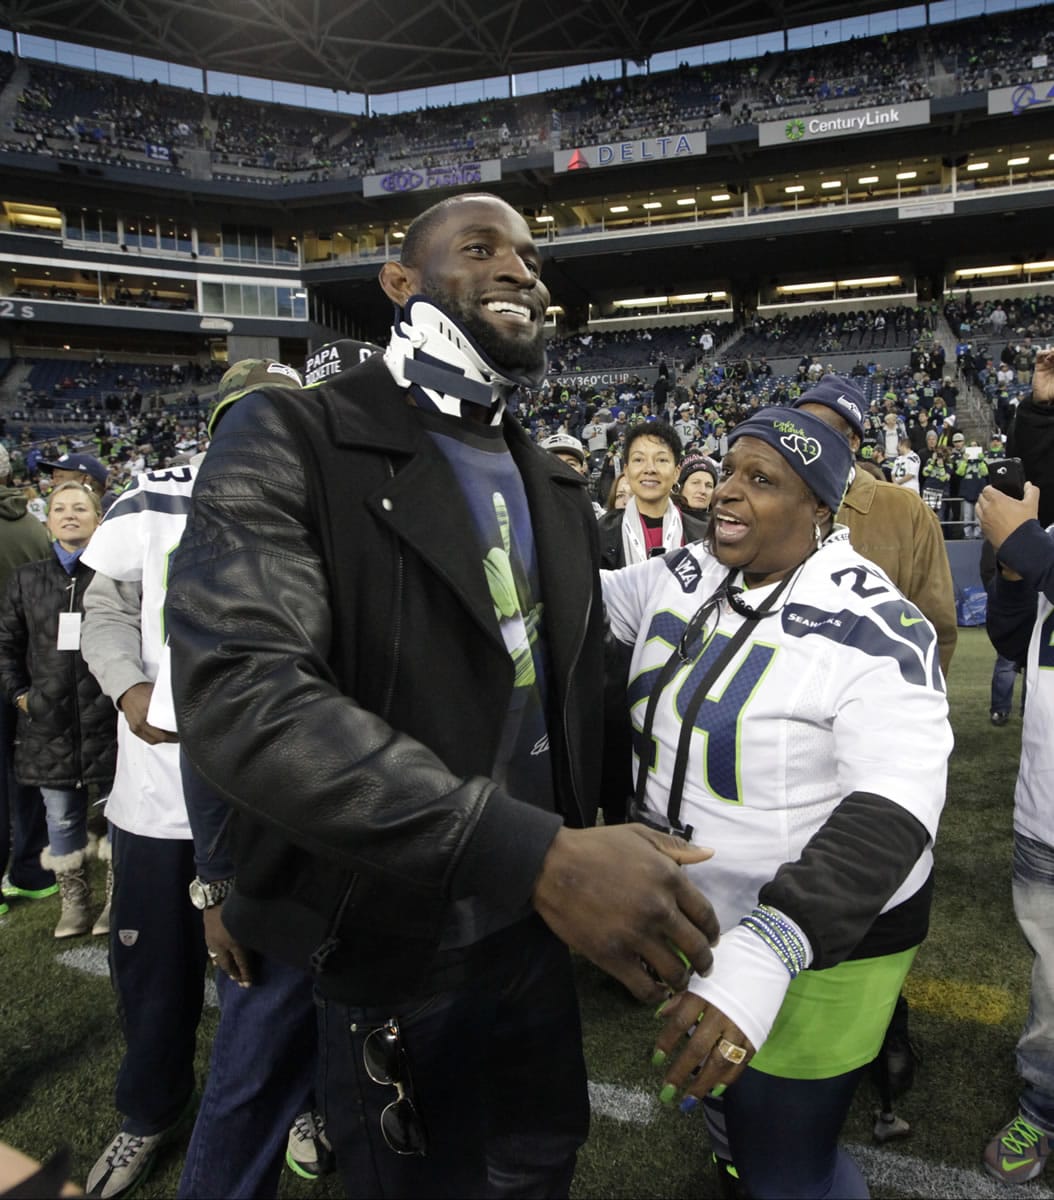 Injured Seattle Seahawks wide receiver Ricardo Lockette wears a neck brace as he is greeted by Delisa Lynch, right, the mother of Seahawks running back Marshawn Lynch, as Lockette arrives at CenturyLink Field before an an NFL football game against the Arizona Cardinals, Sunday, Nov. 15, 2015, in Seattle.